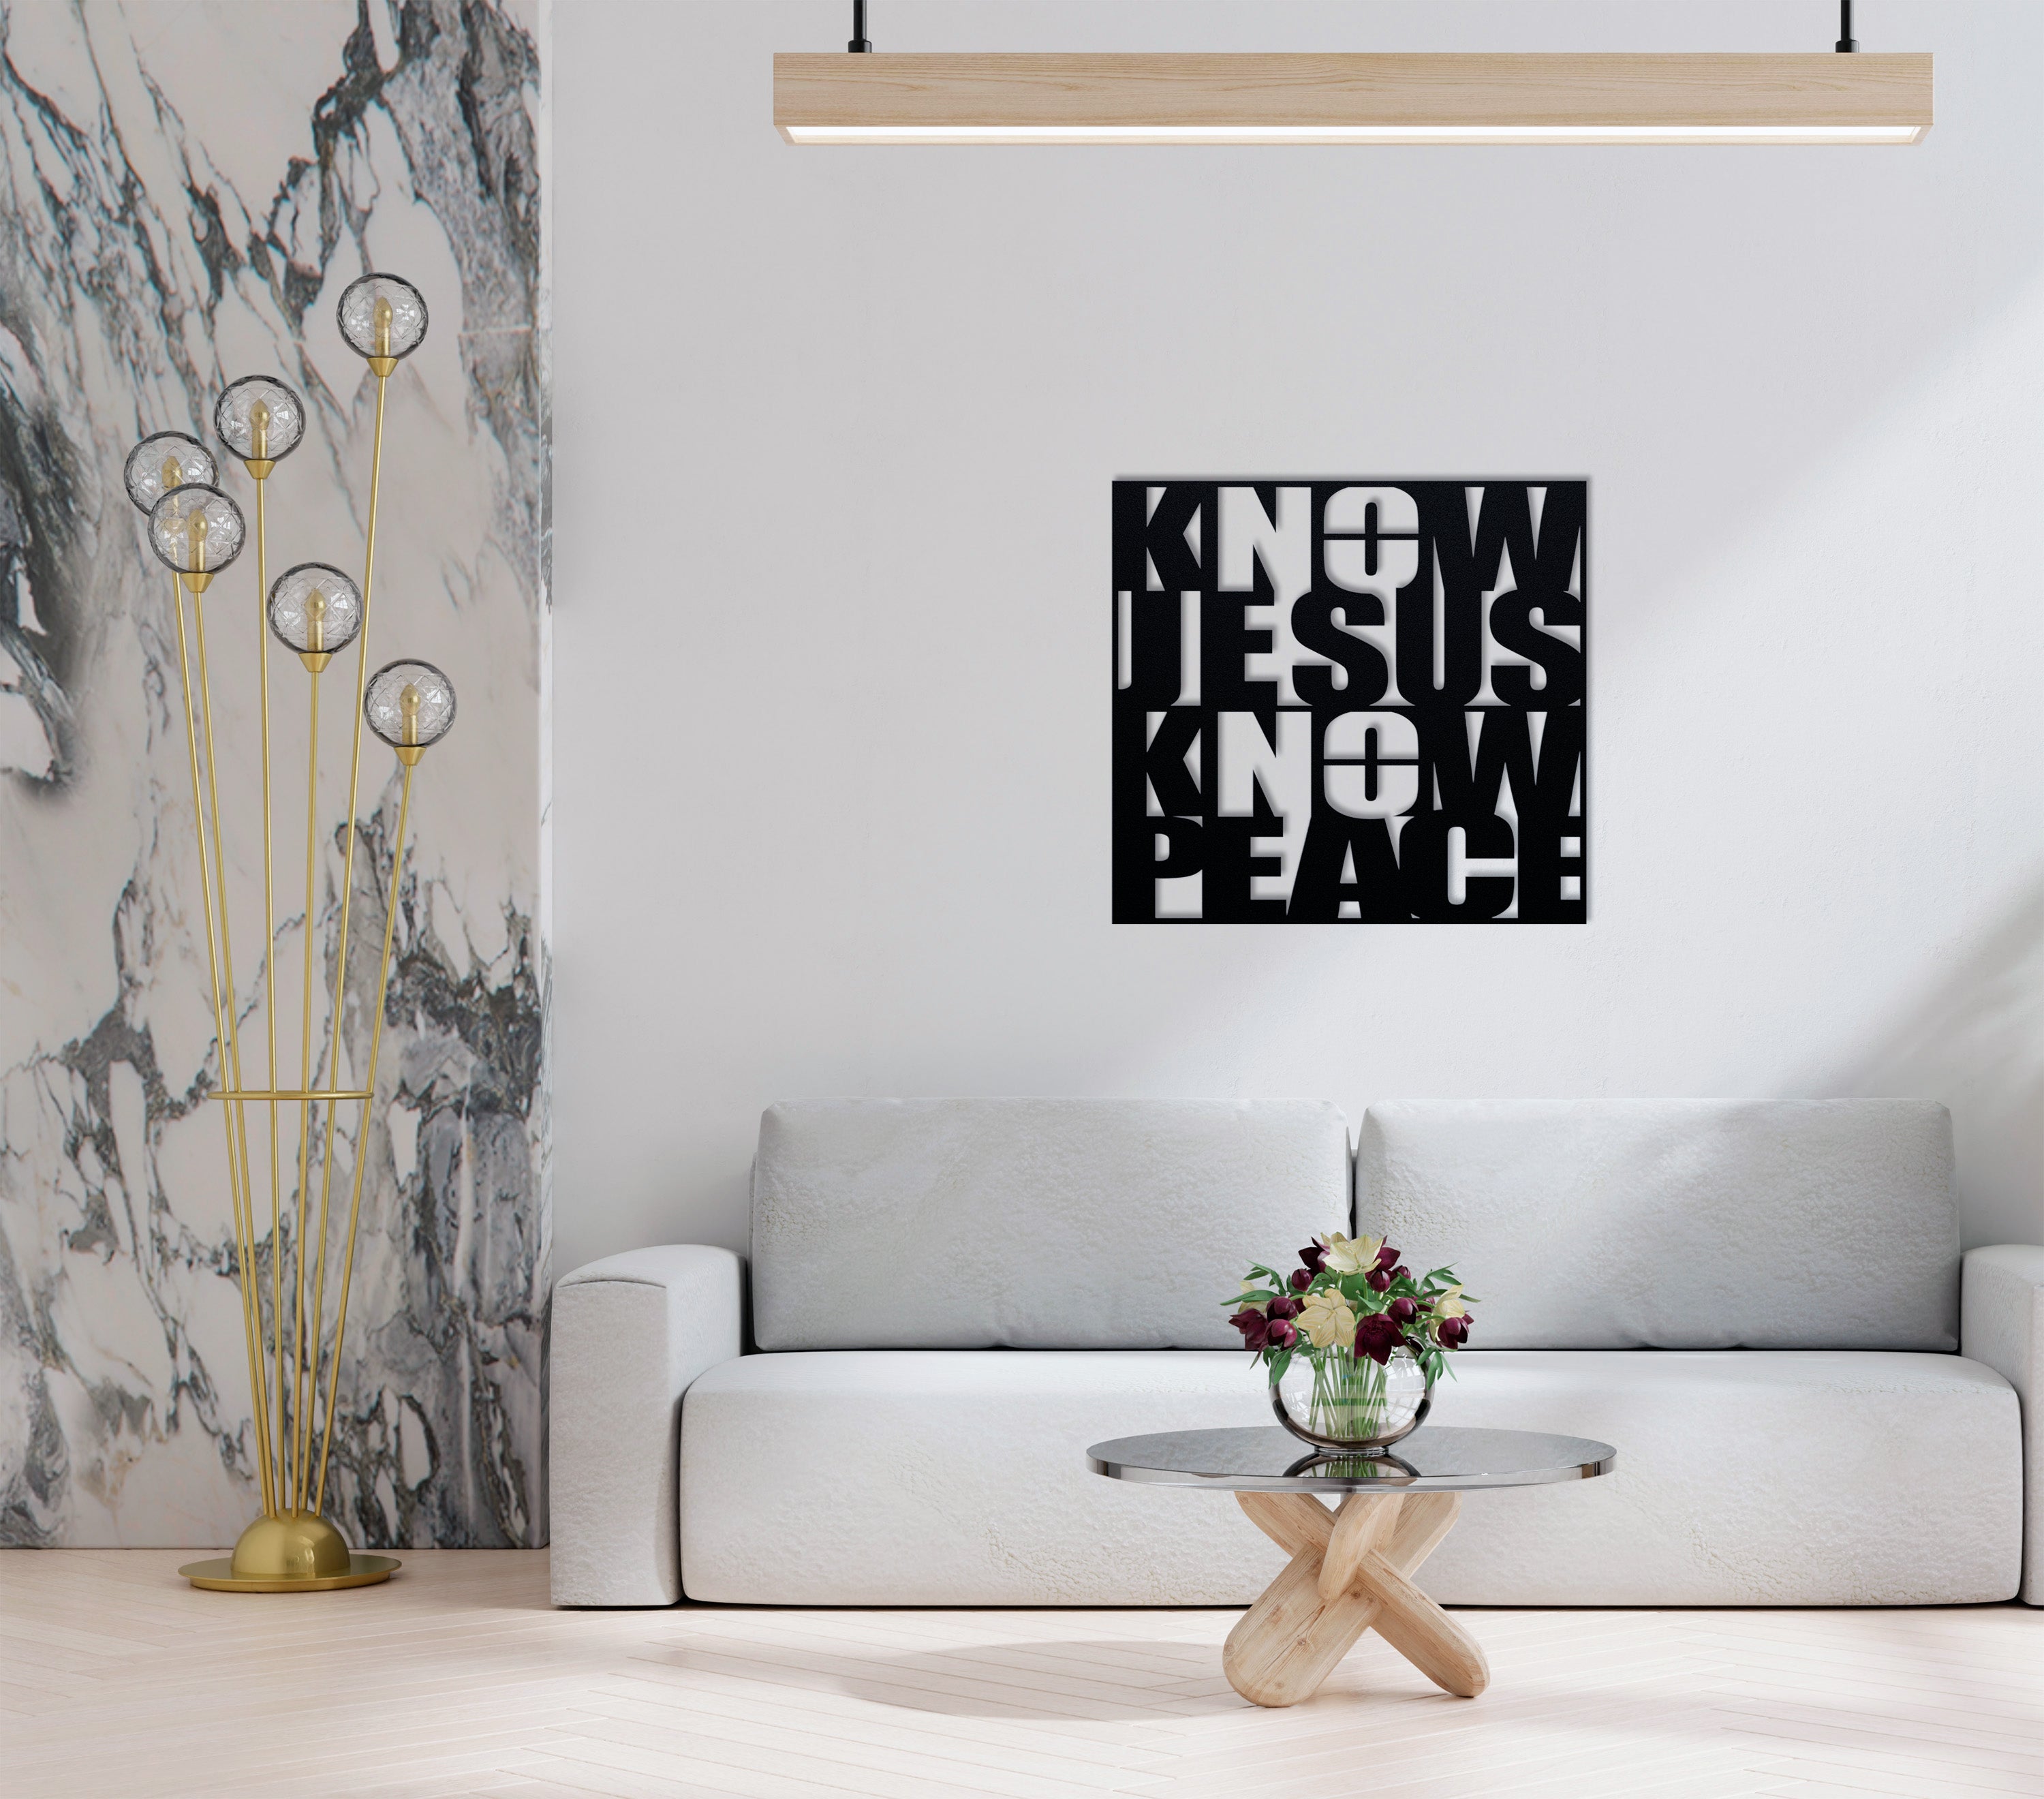 Know Jesus, Know Peace Sign on Wall